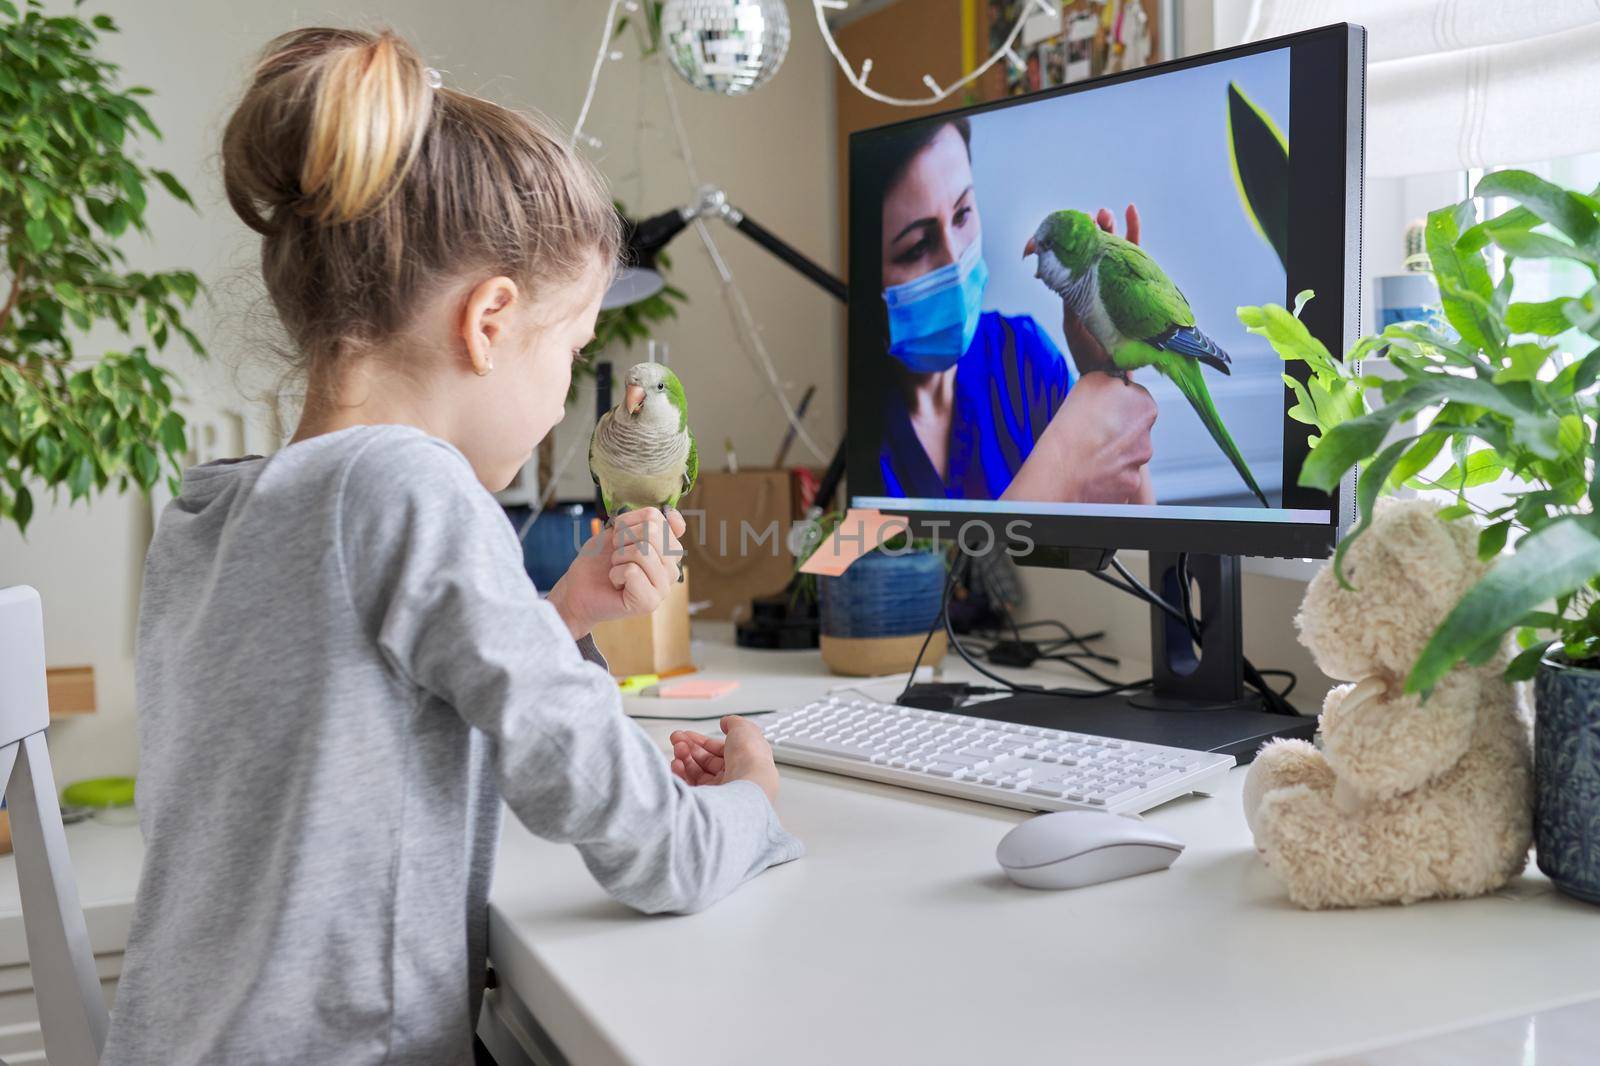 Girl and pet green parrot together at home, child watches video on computer, veterinarian doctor's consultation on the care and lifestyle of Quaker parrots. Bird care, children and animals friendship